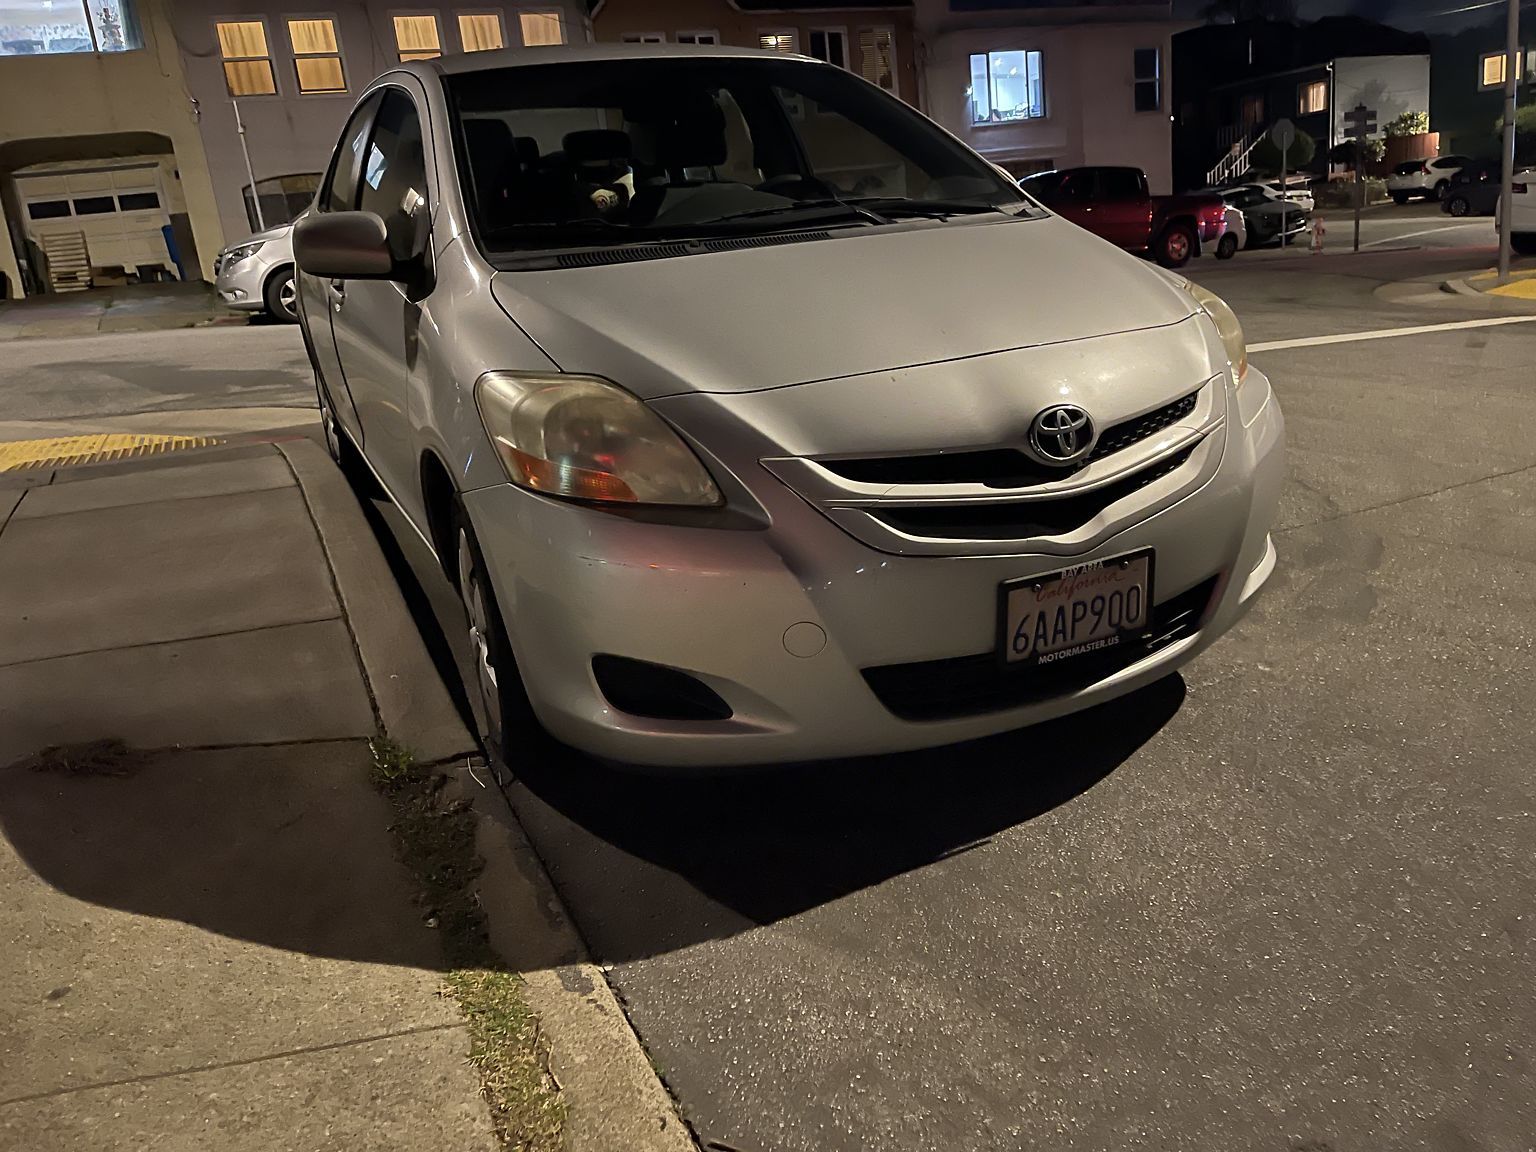 Photo of car in the street with license plate 6AAP900 in California